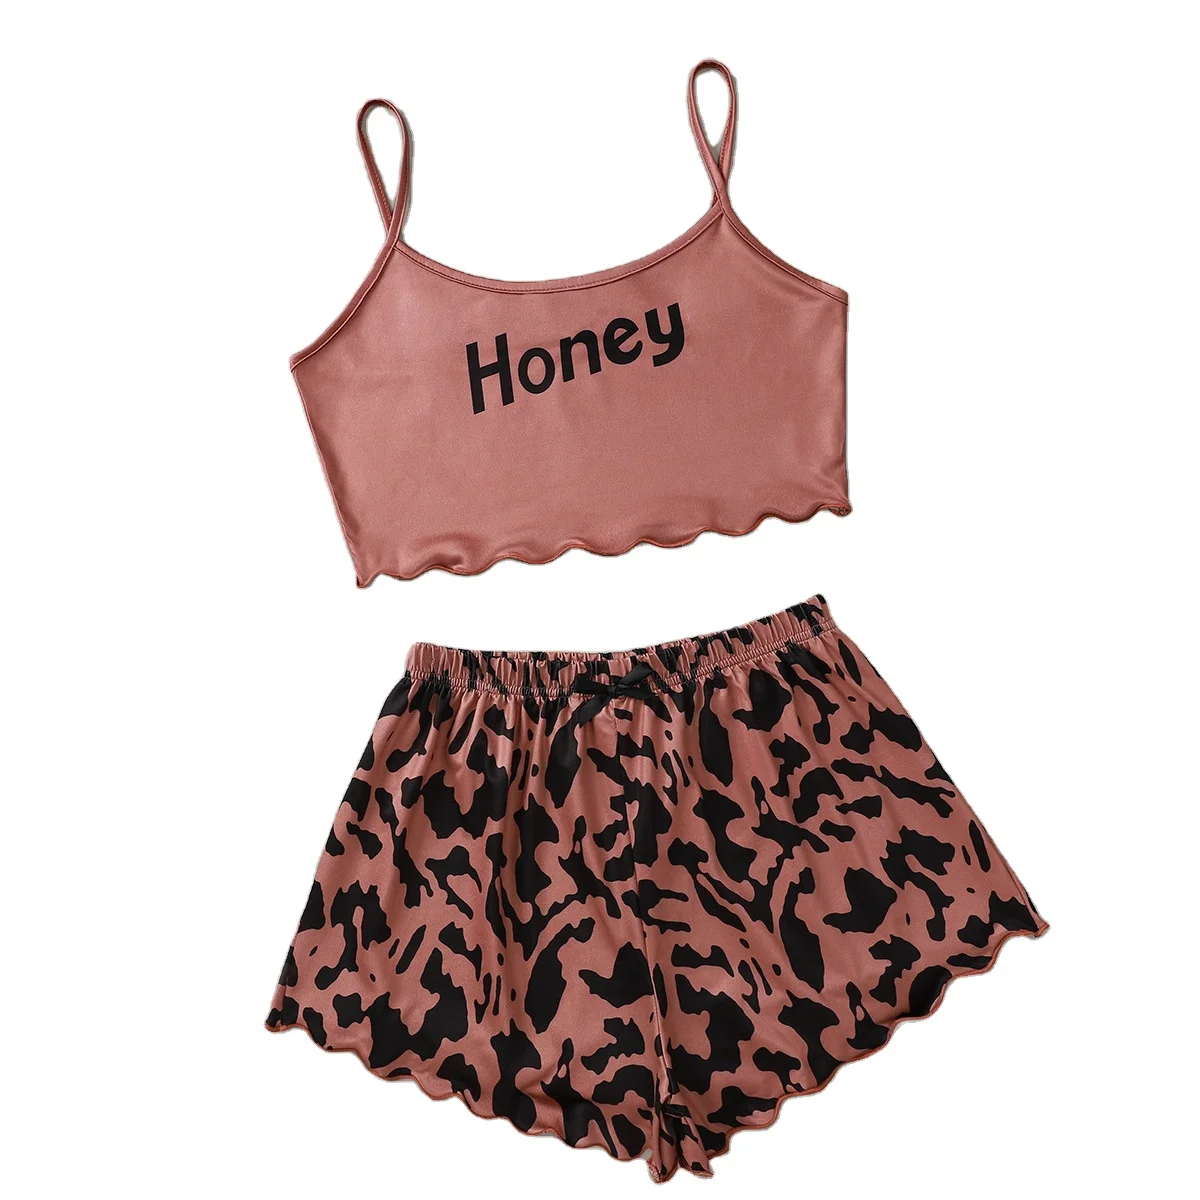 

New Honey letter print cami top and leopard print bow shorts sexy pajamas cotton sleepwear women two piece pajama set, Picture shows